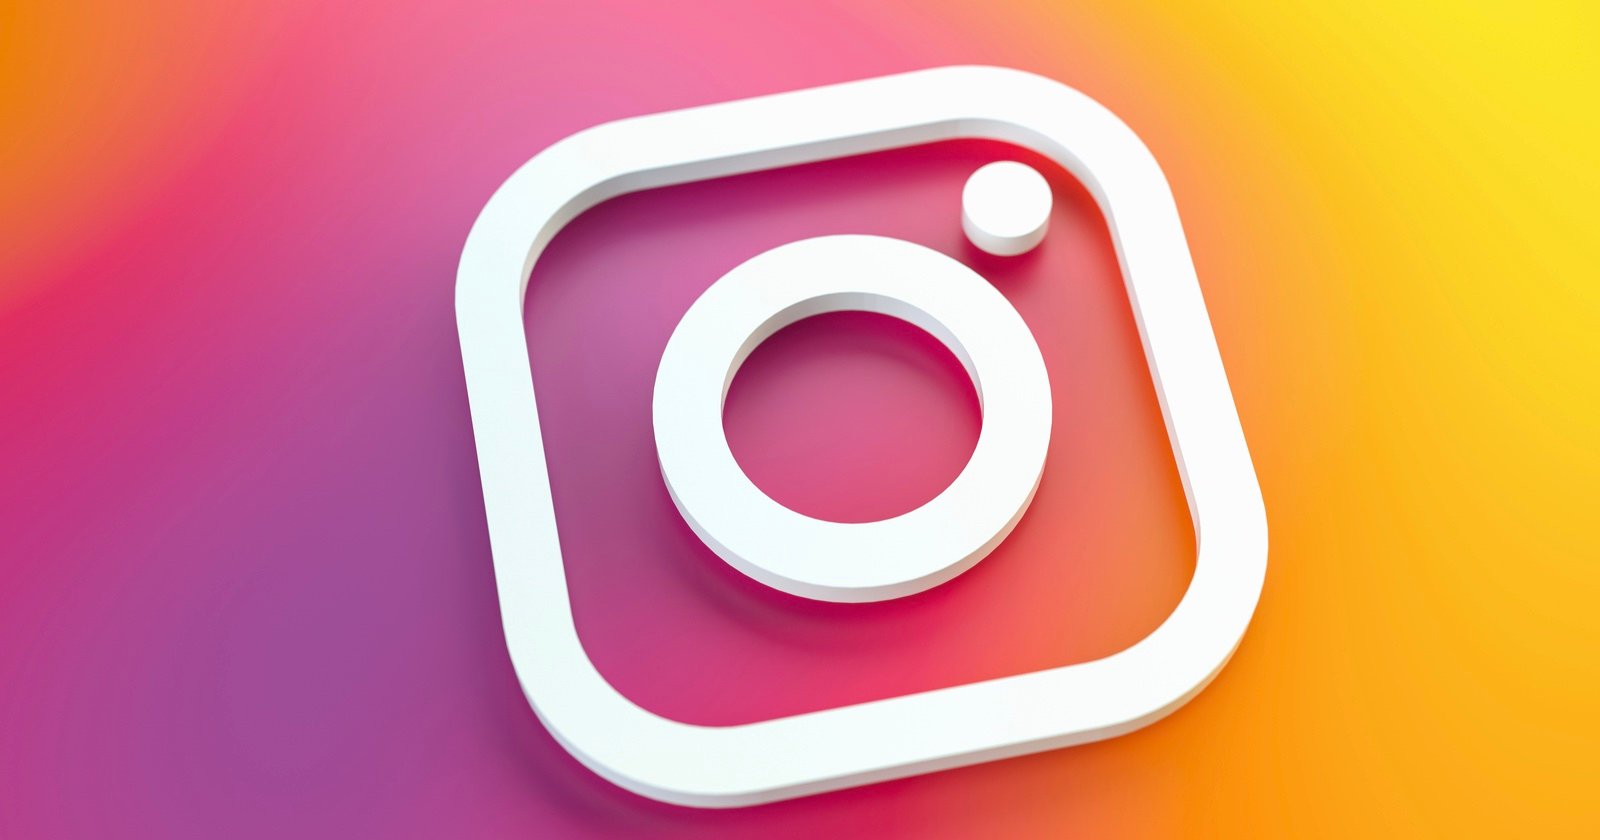  instagram may soon let create your own 